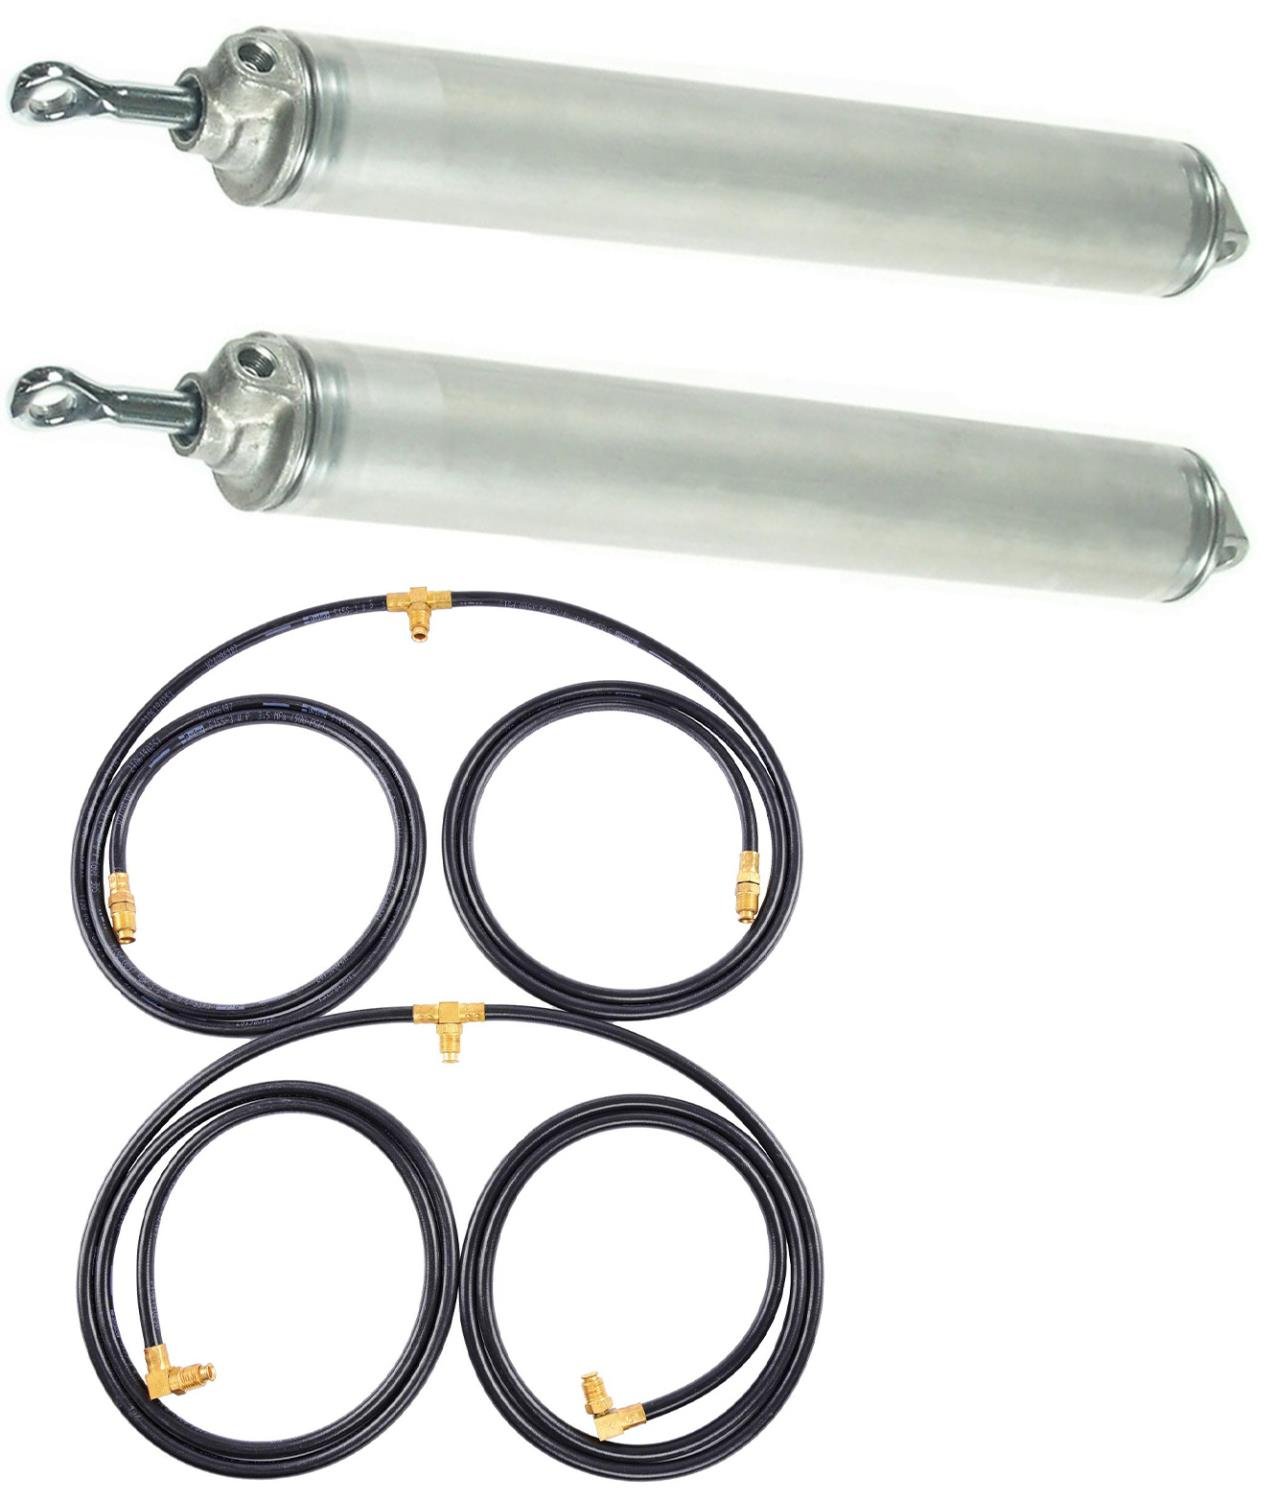 Convertible Top Cylinder & Hose Kit for 1961 Buick, Cadillac, Chevrolet, Oldsmobile, Full-Size Convertibles [Sold as a Kit]